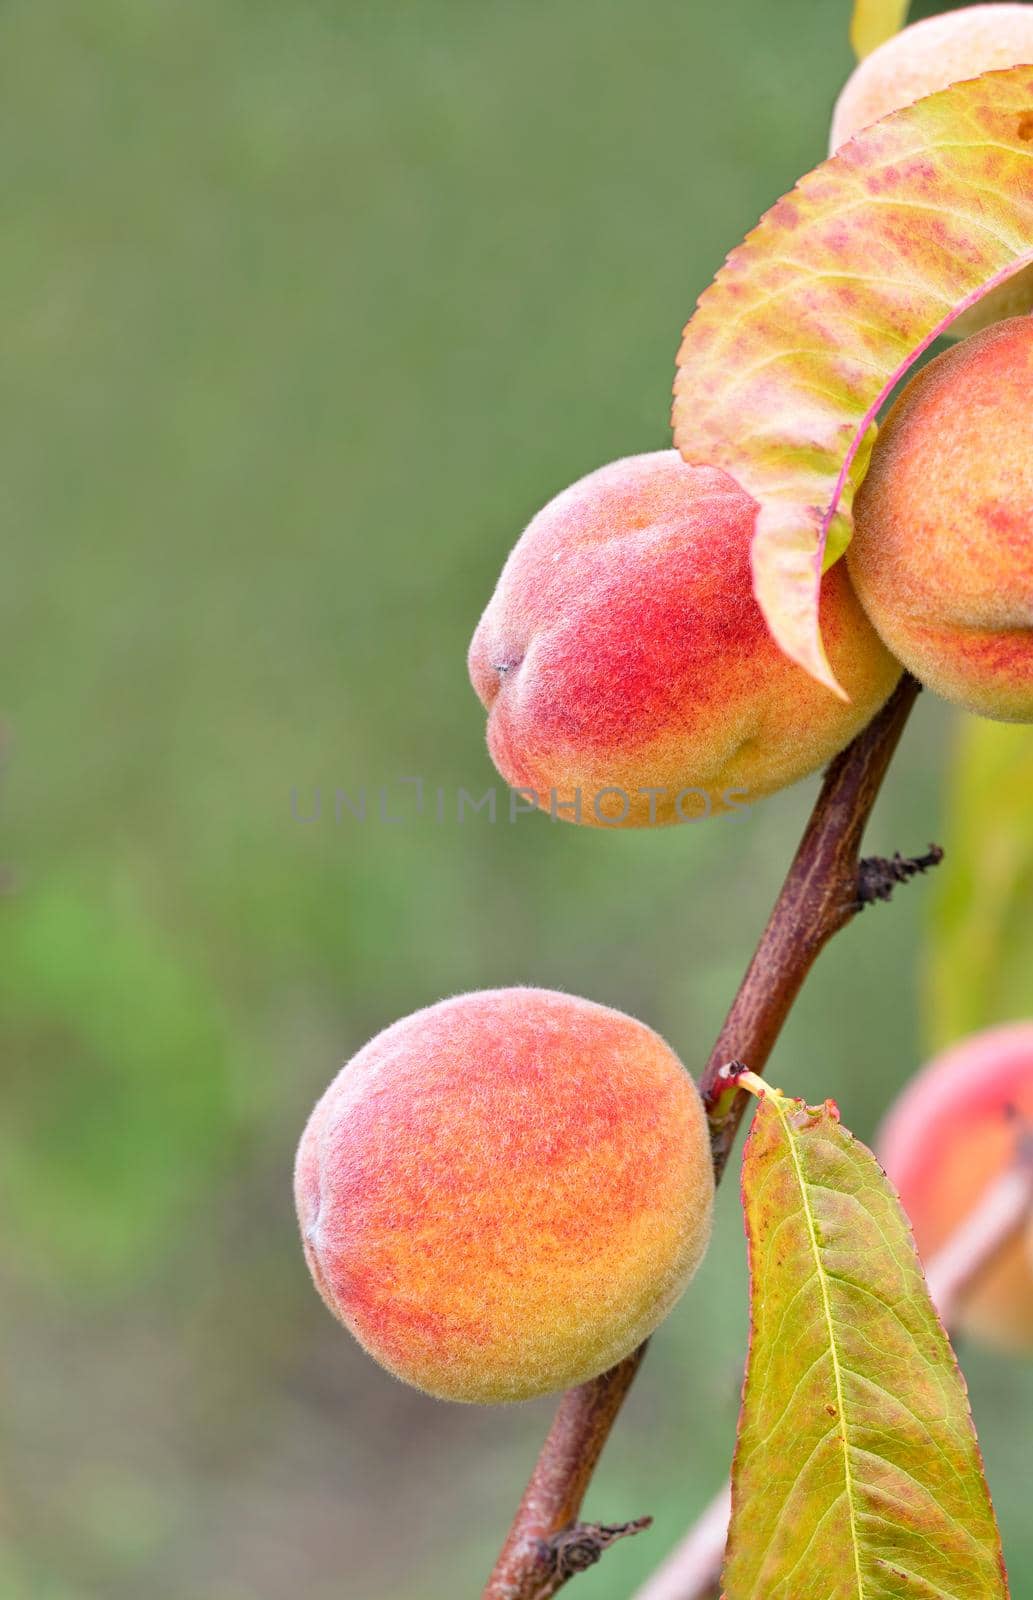 Sweet peach fruits grow on a young branch of a peach tree against a blurred green foliage background, close-up, copy space, vertical image.